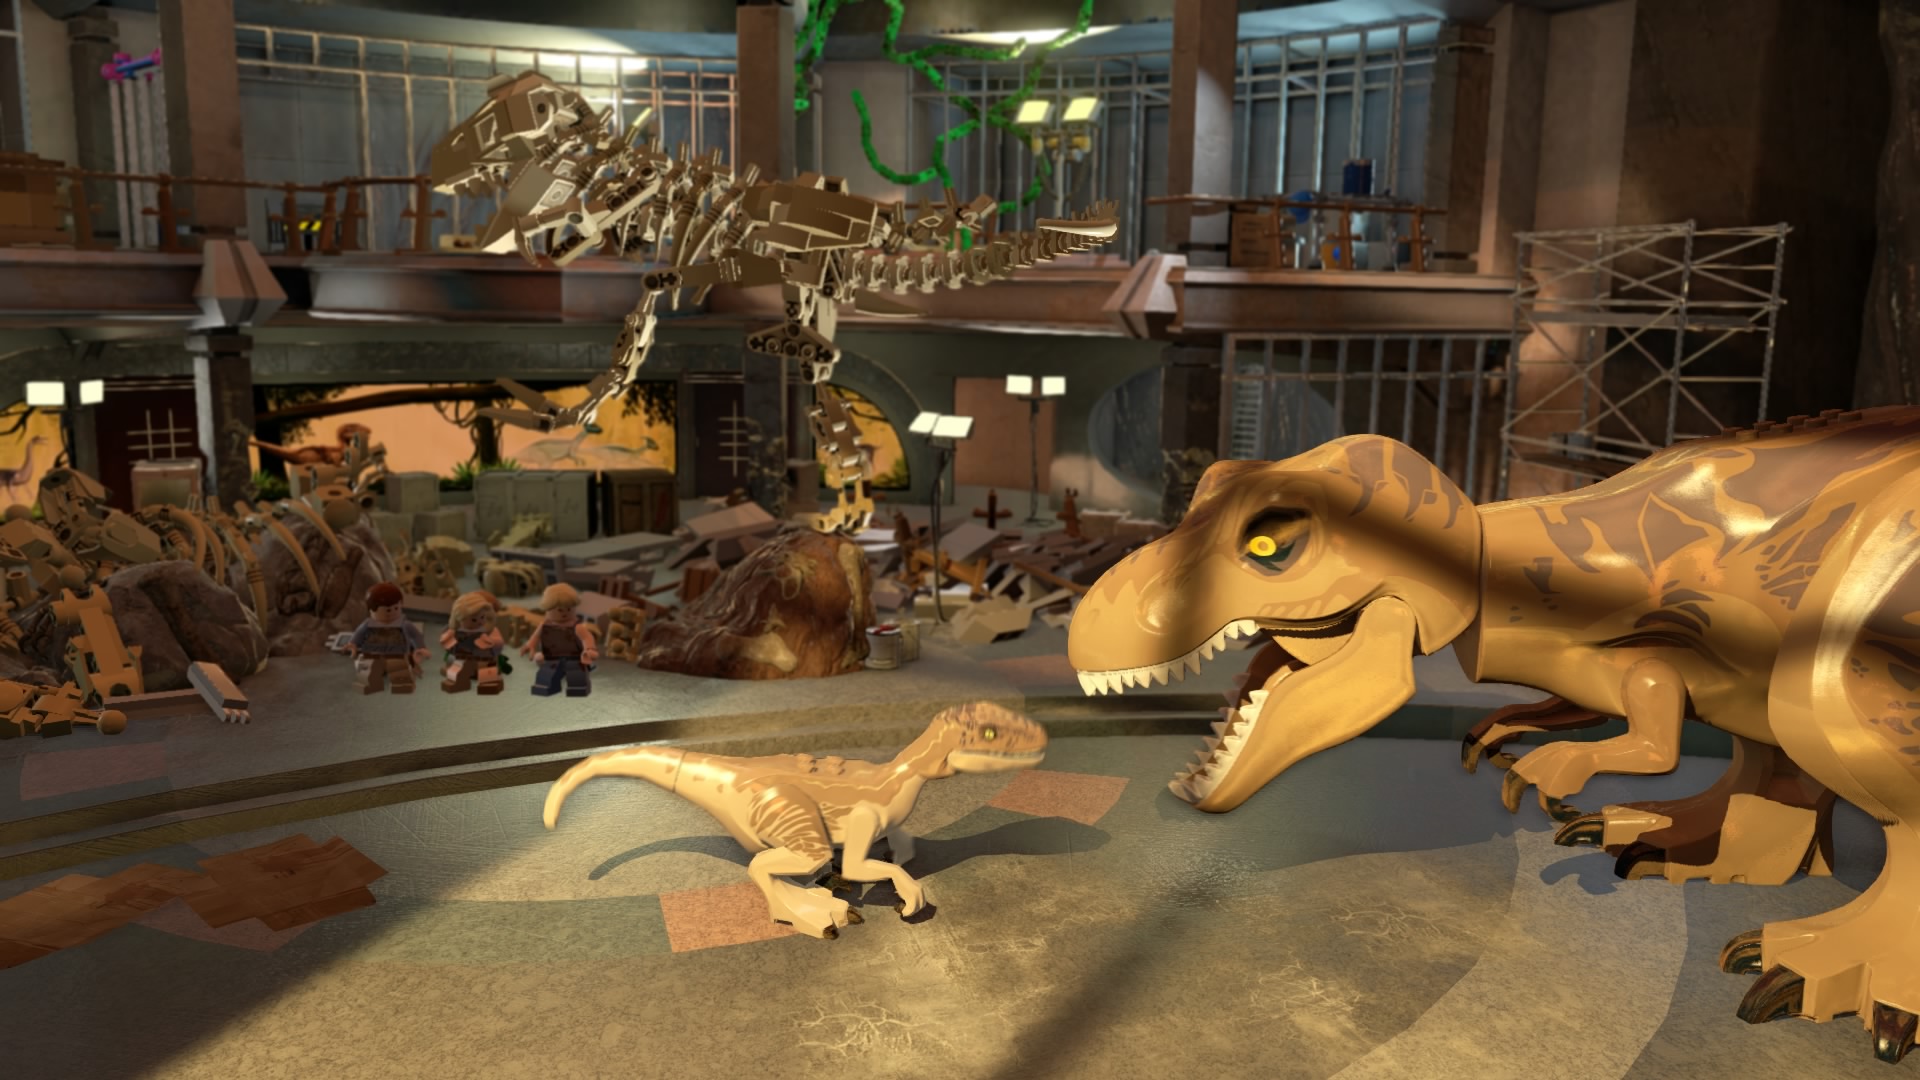 Lego Jurassic World launches with new trailer